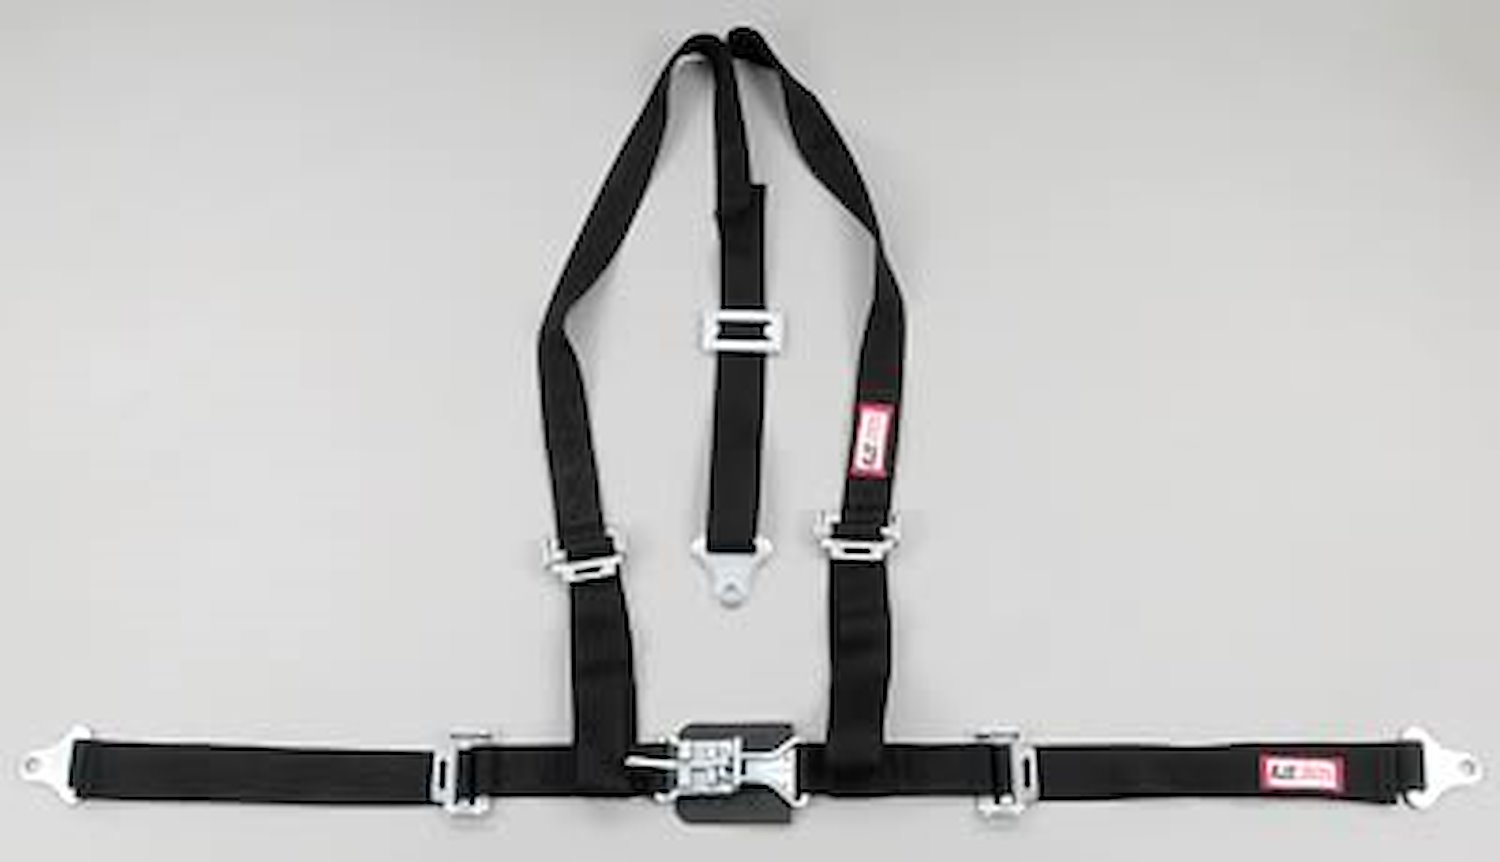 NON-SFI L&L HARNESS 3 PULL DOWN Lap Belt SNAP SEWN IN 2 S.H. Individual FLOOR Mount WRAP/BOLT HOT PINK